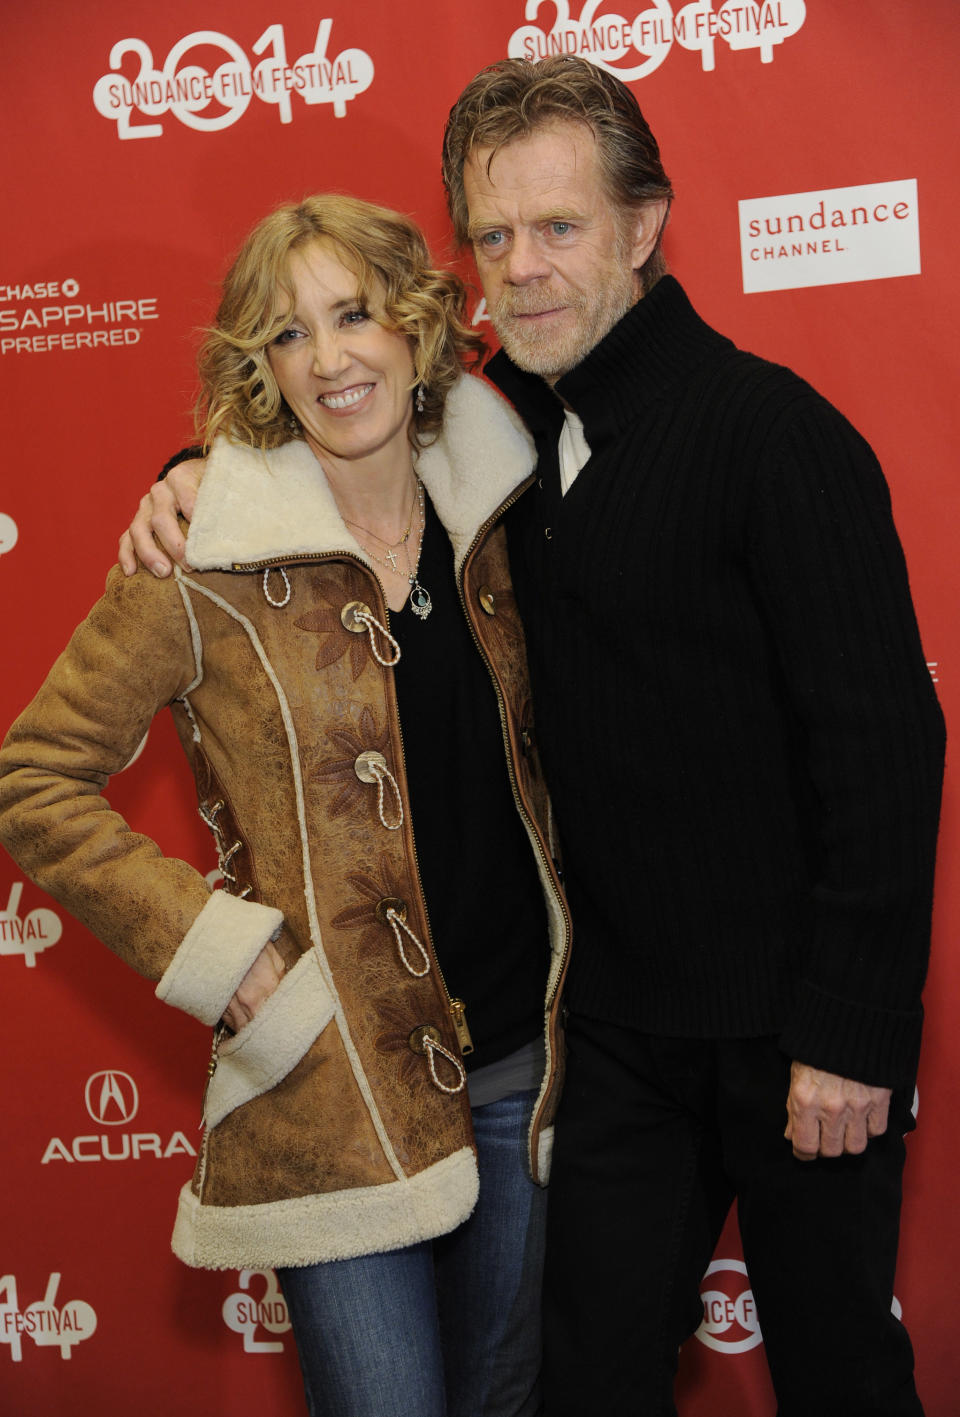 William H. Macy, right, writer/director/cast member of "Ruddlerless," poses with his wife, cast member Felicity Huffman, at the premiere of the film at the 2014 Sundance Film Festival, on Friday, Jan. 24, 2014, in Park City, Utah. (Photo by Chris Pizzello/Invision/AP)